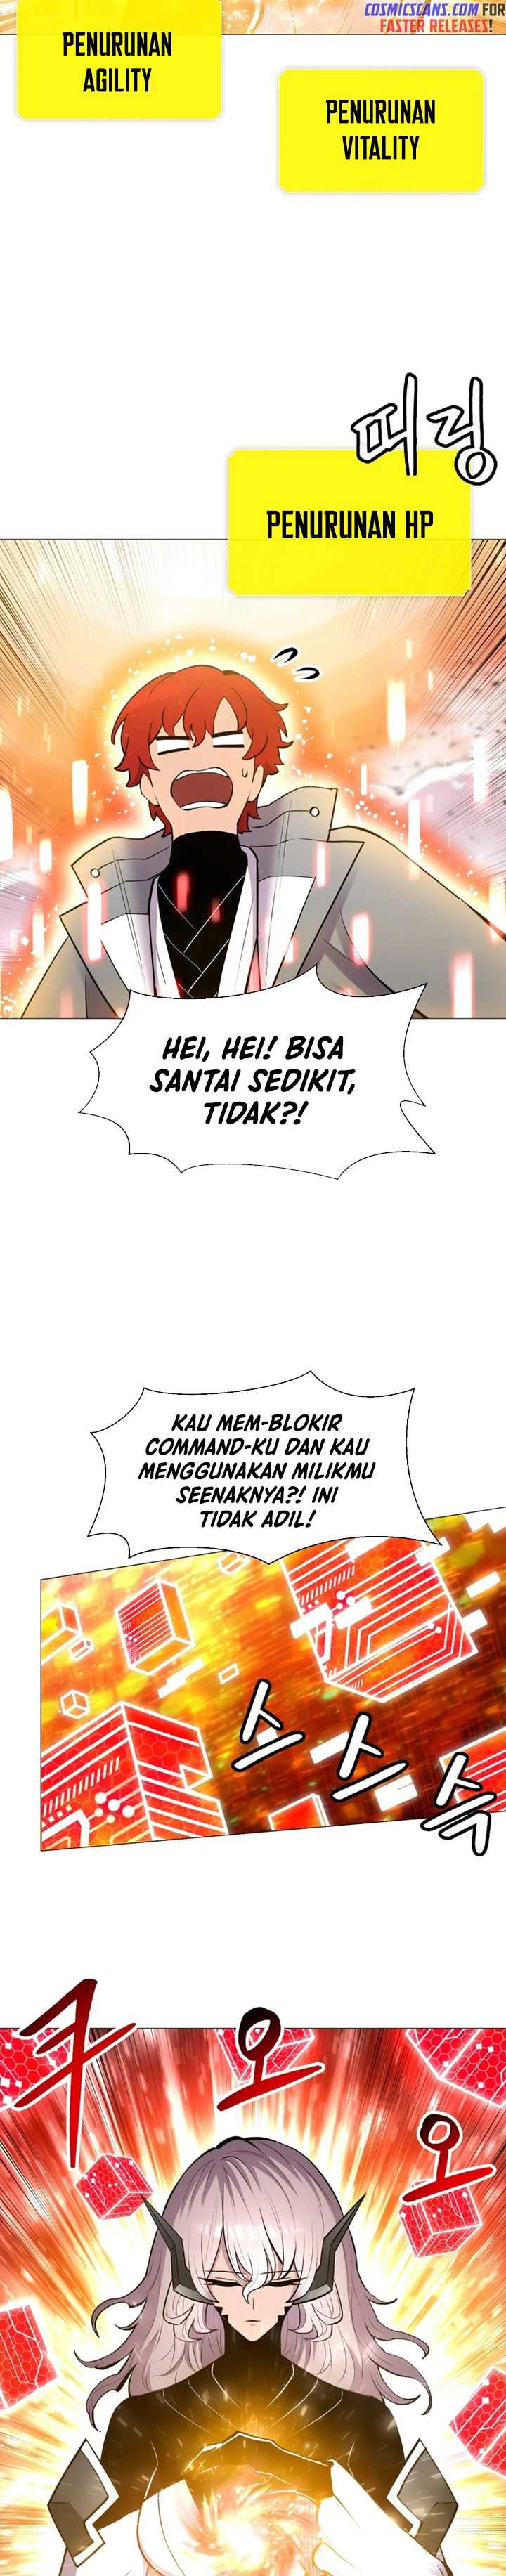 Updater Chapter 96